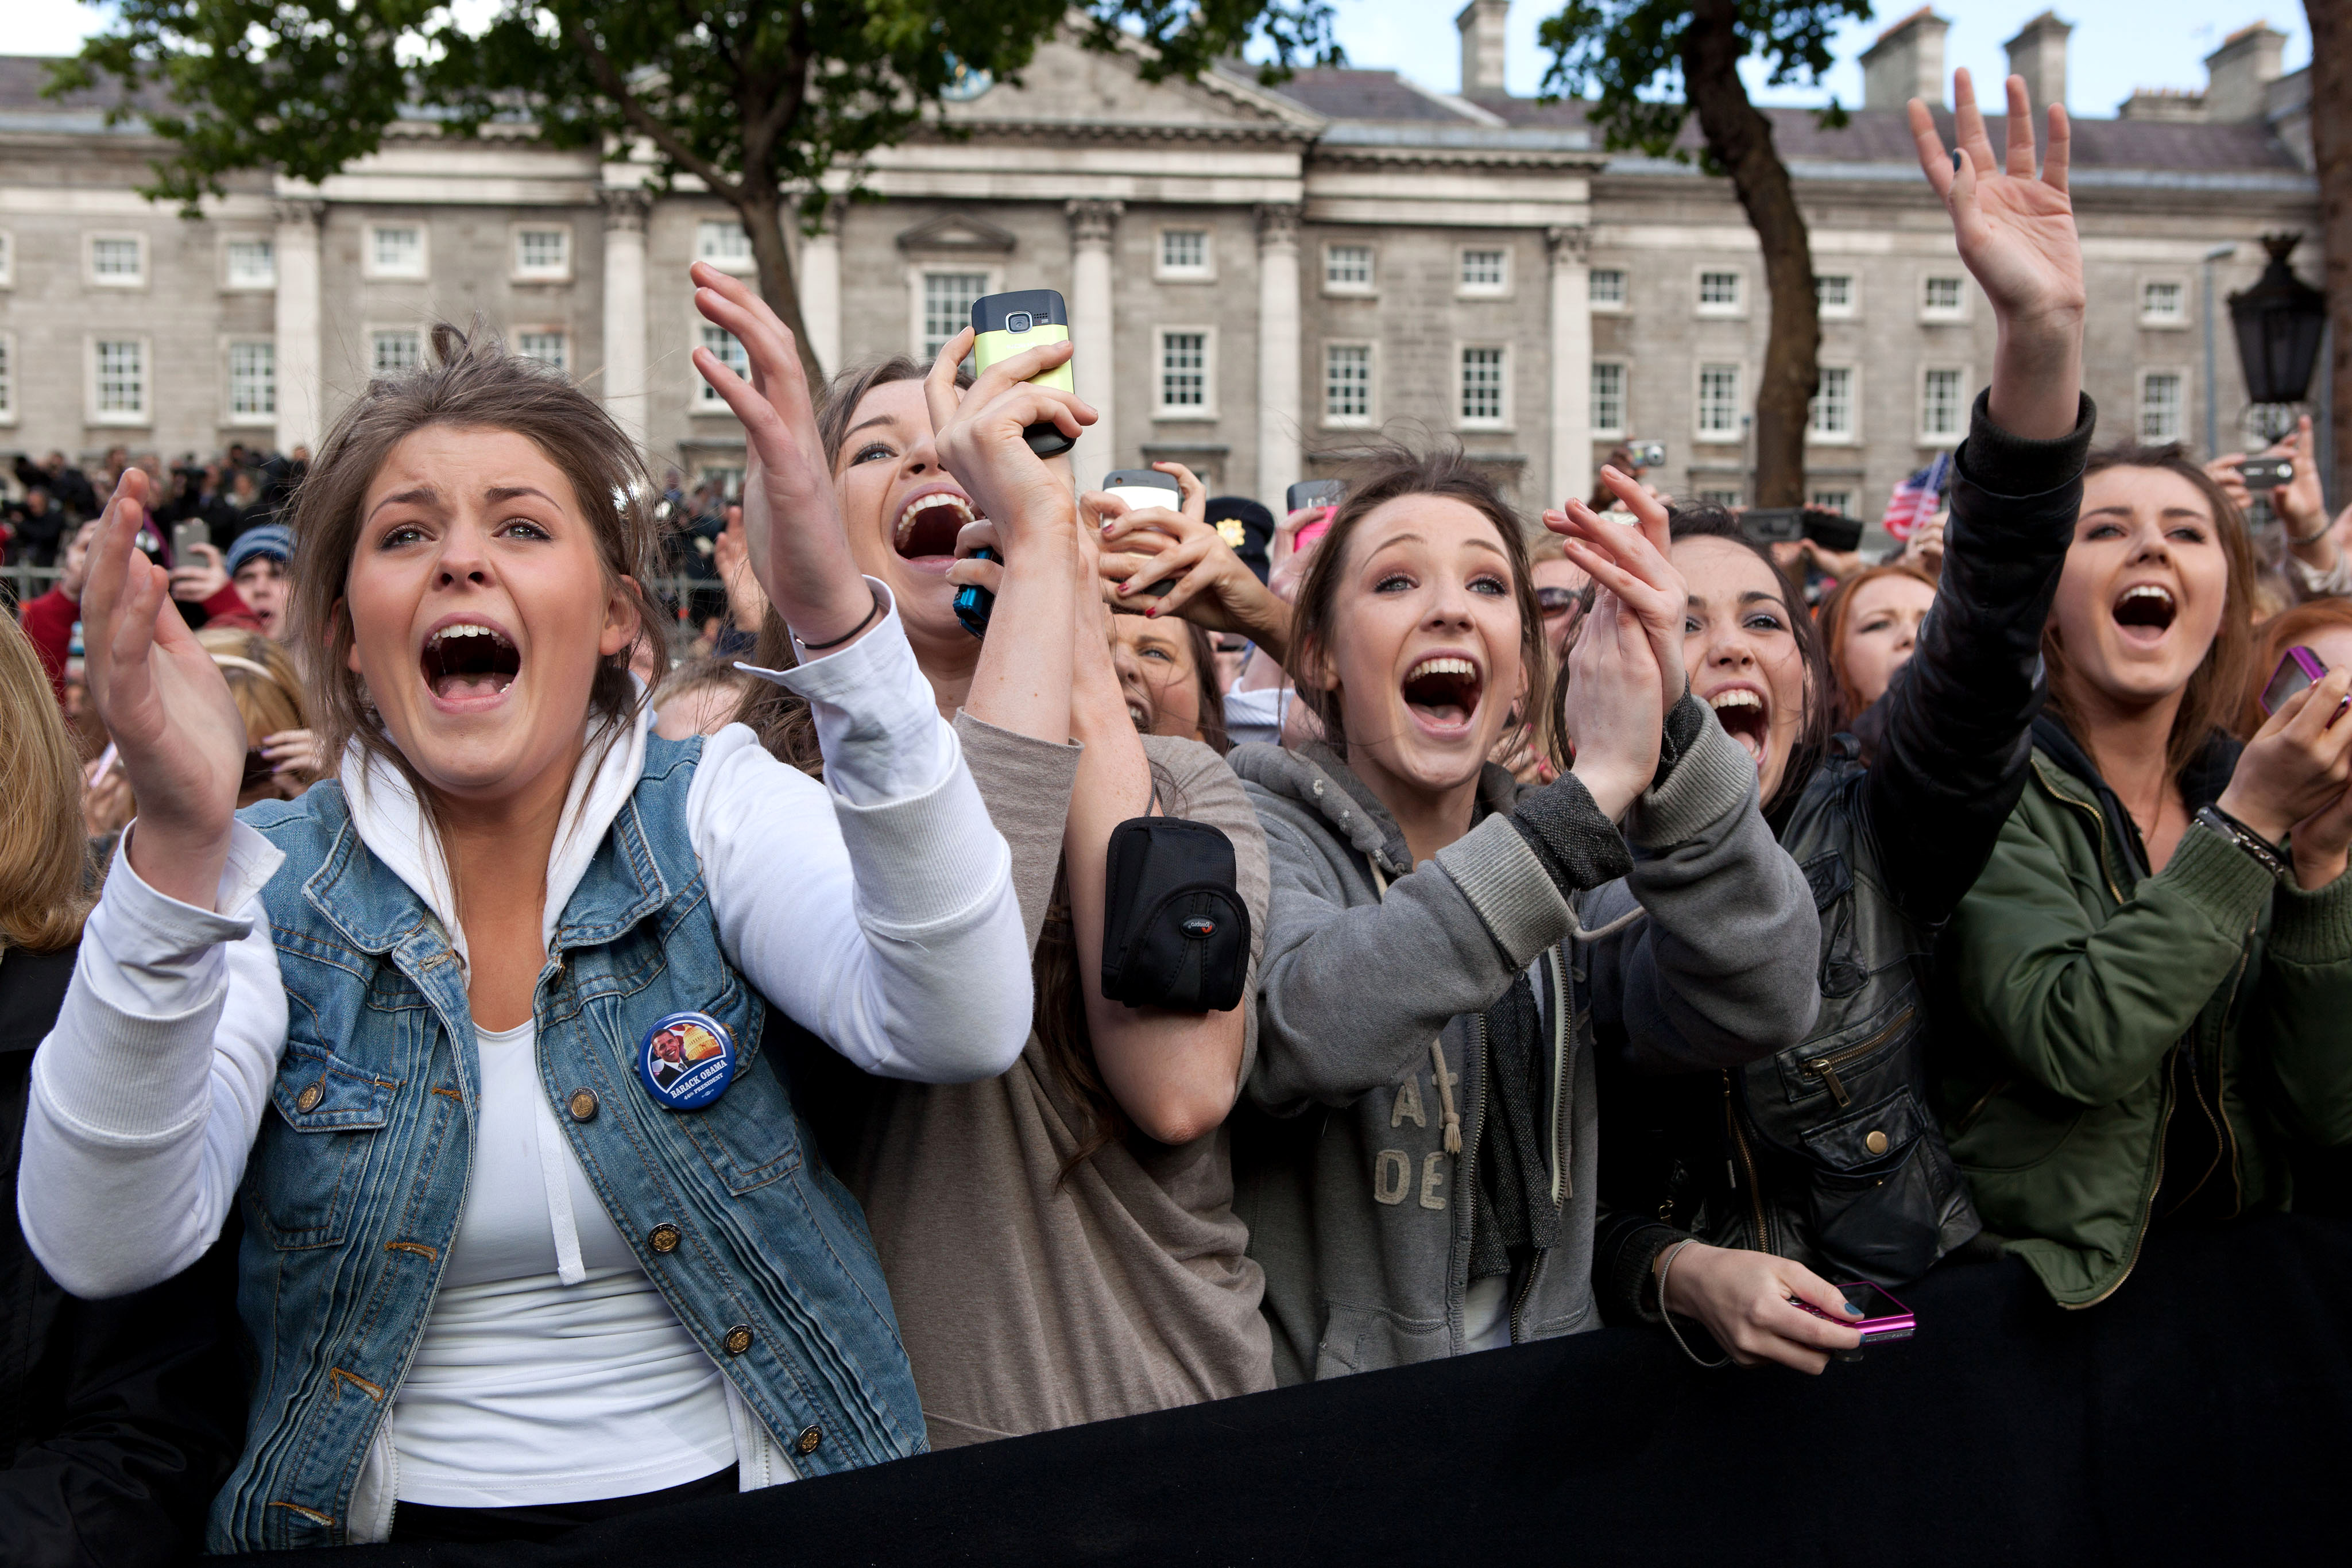 People Cheer at the Irish celebration at College Green in Dublin